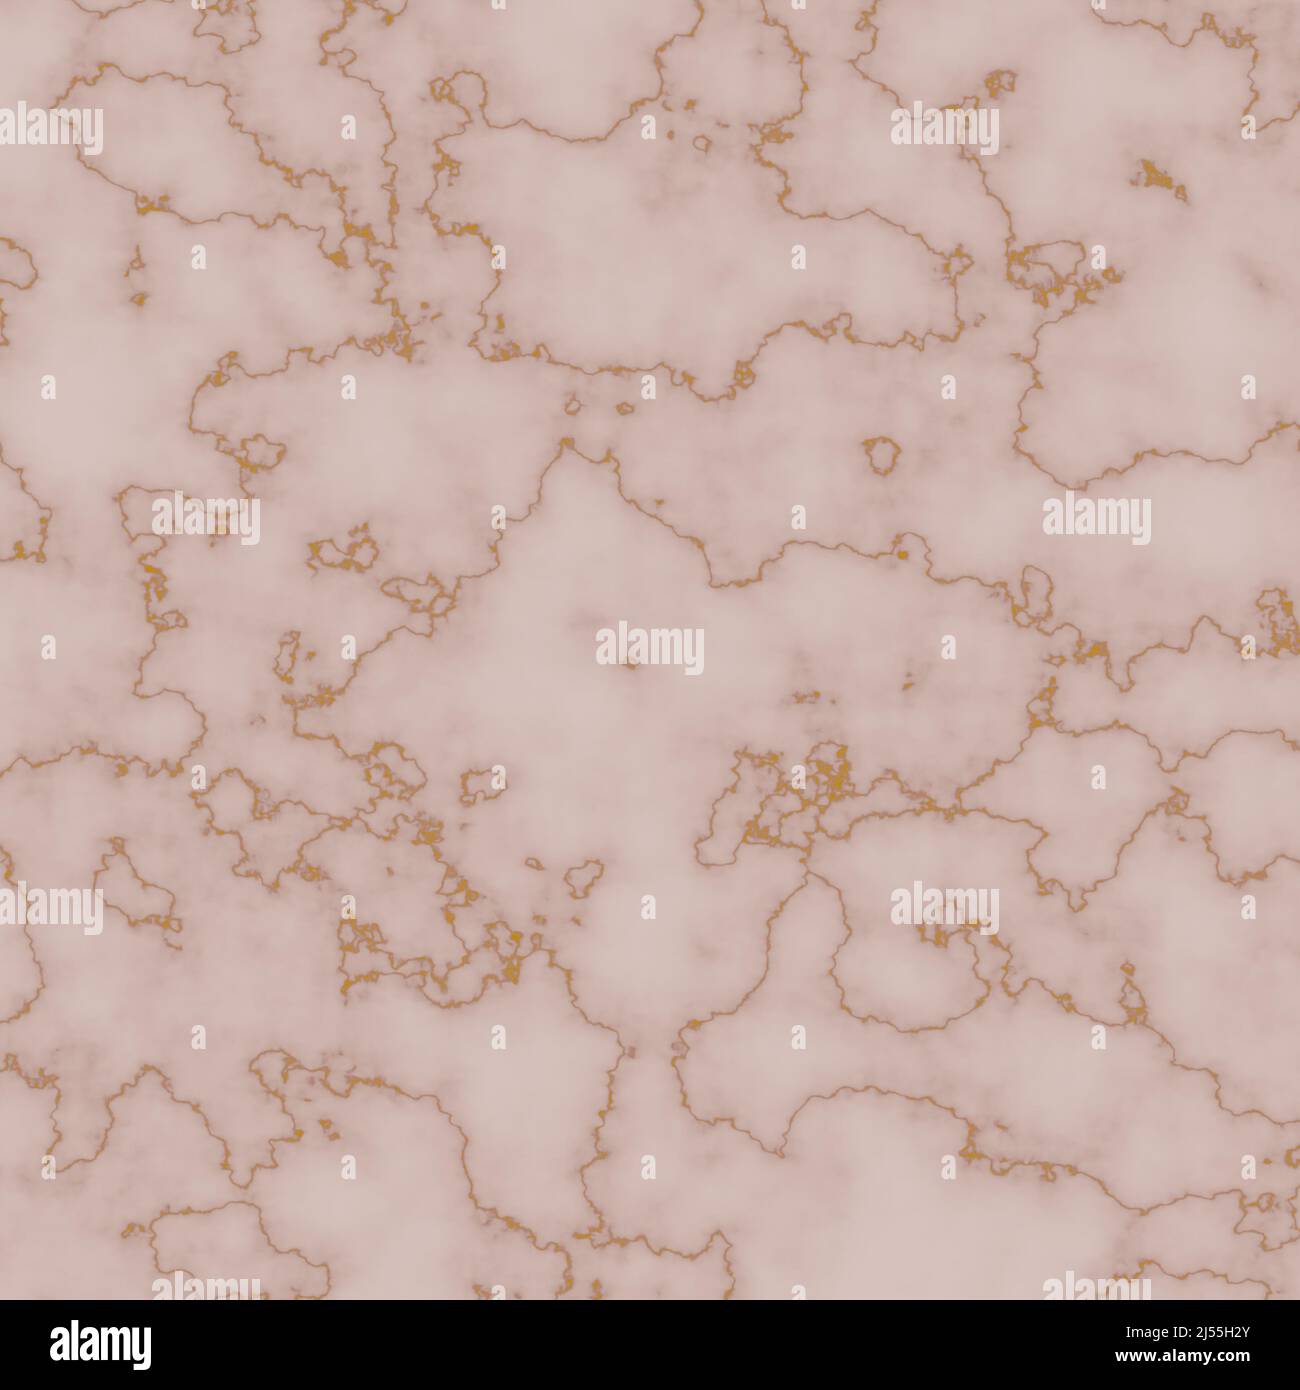 Rose gold marbling pattern background in a granite texture for design elements. Stock Photo